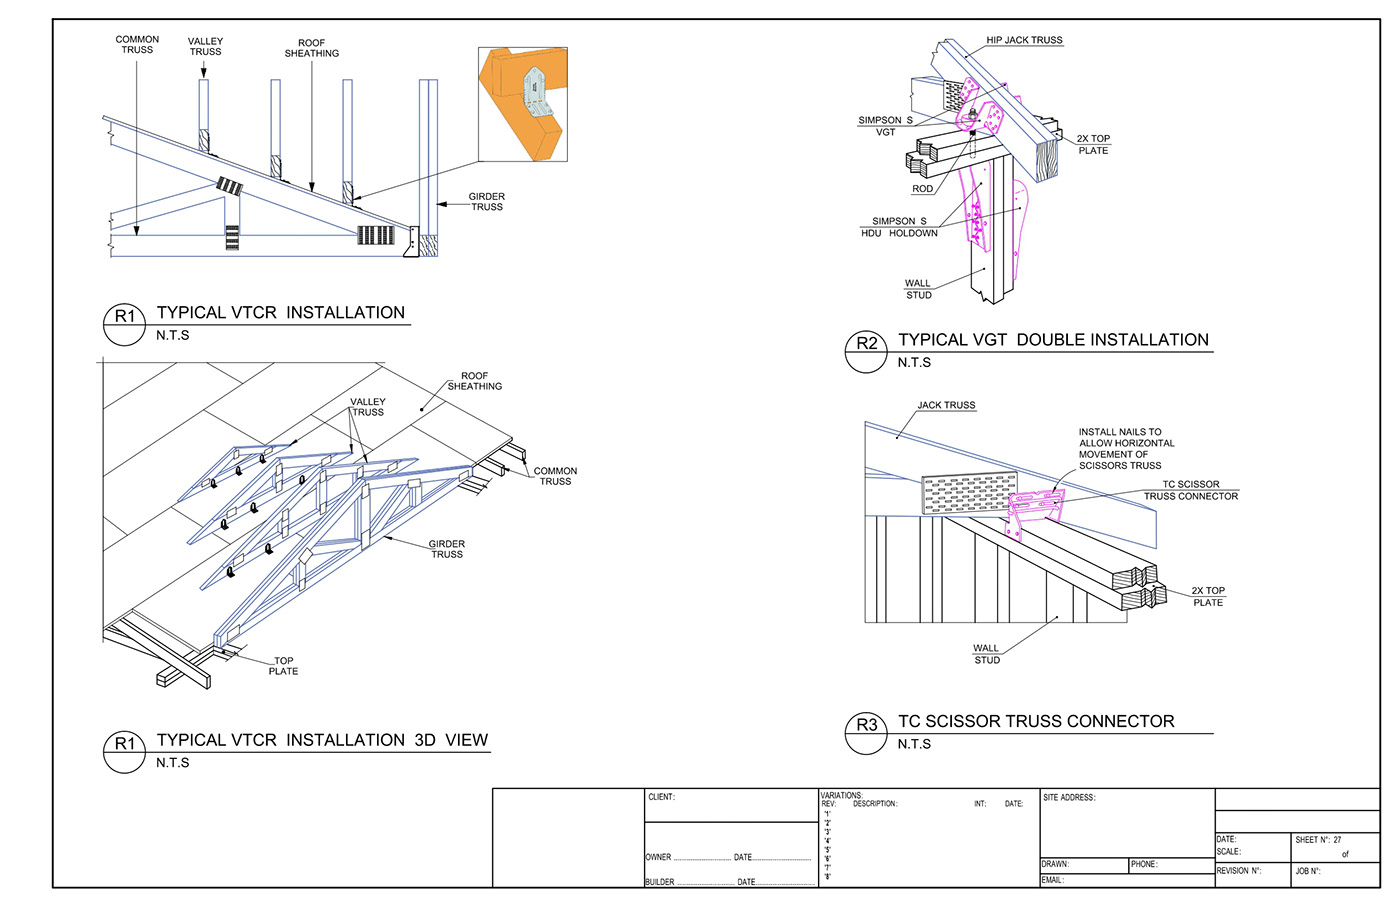 3ds max architecture AutoCAD building construction details house structural design Structural drawing civil engineering